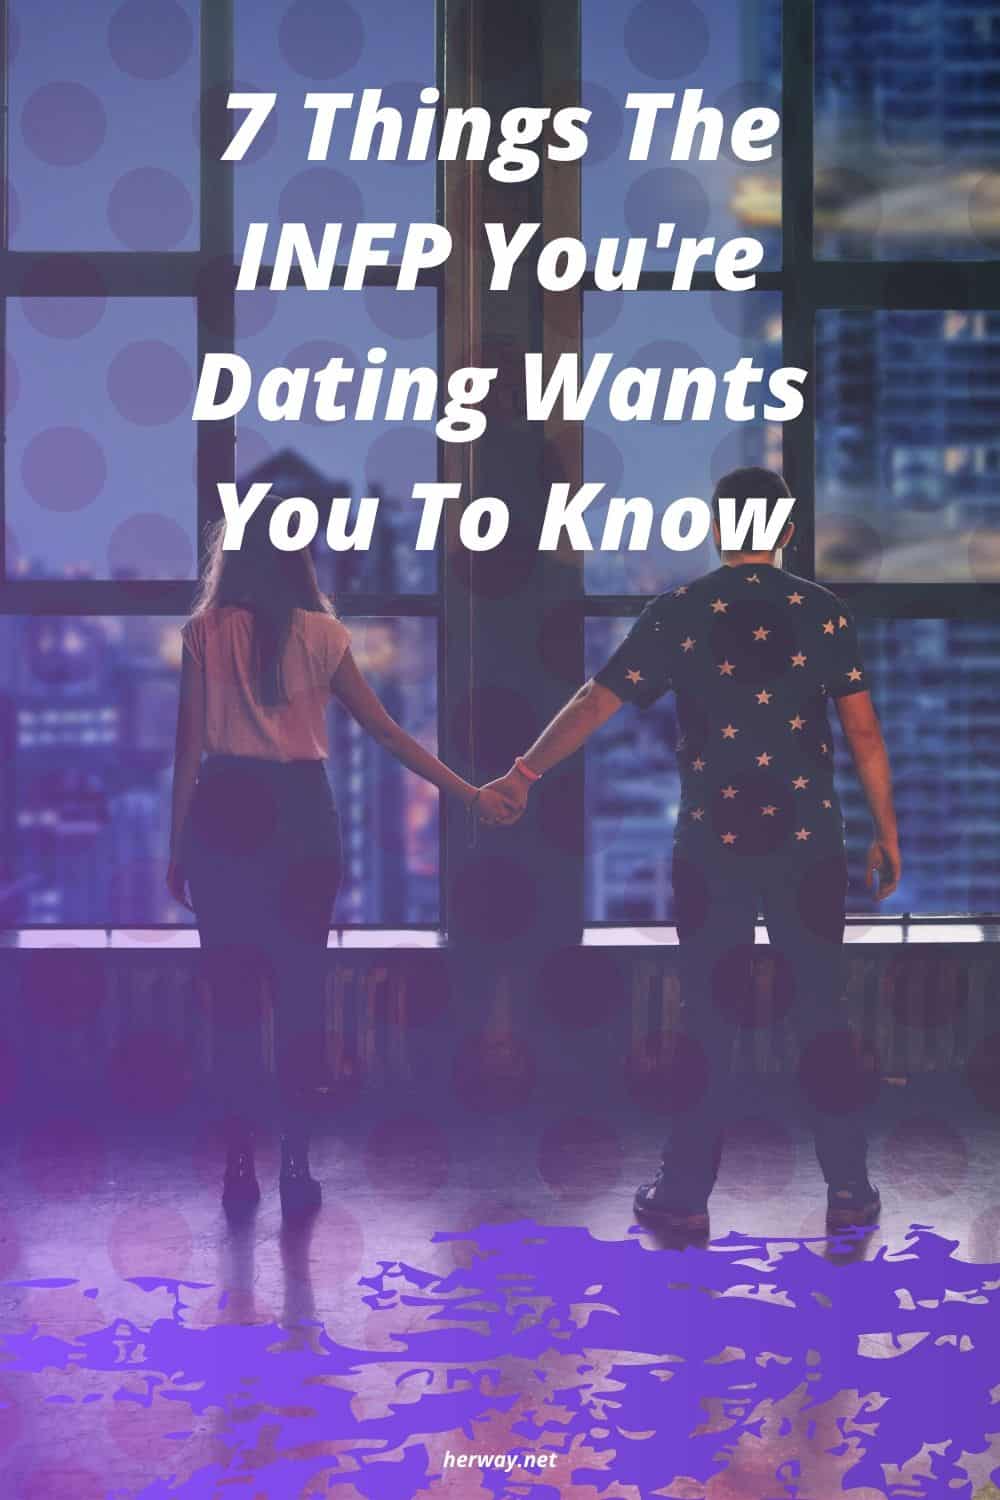 7 Things The INFP You're Dating Wants You To Know